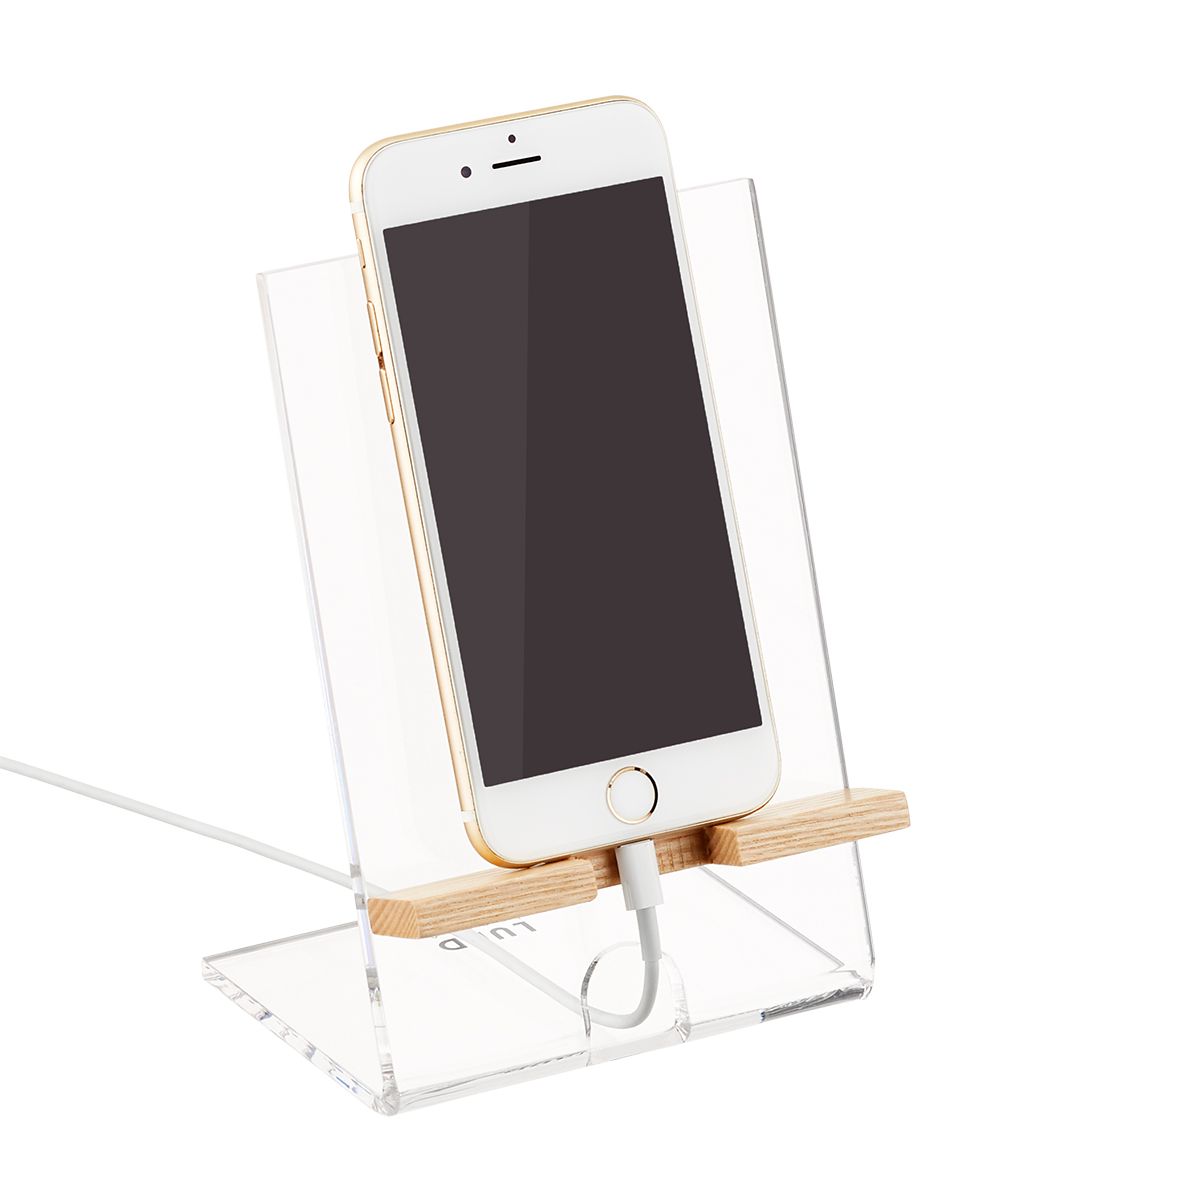 Nordic Phone Holder | The Container Store